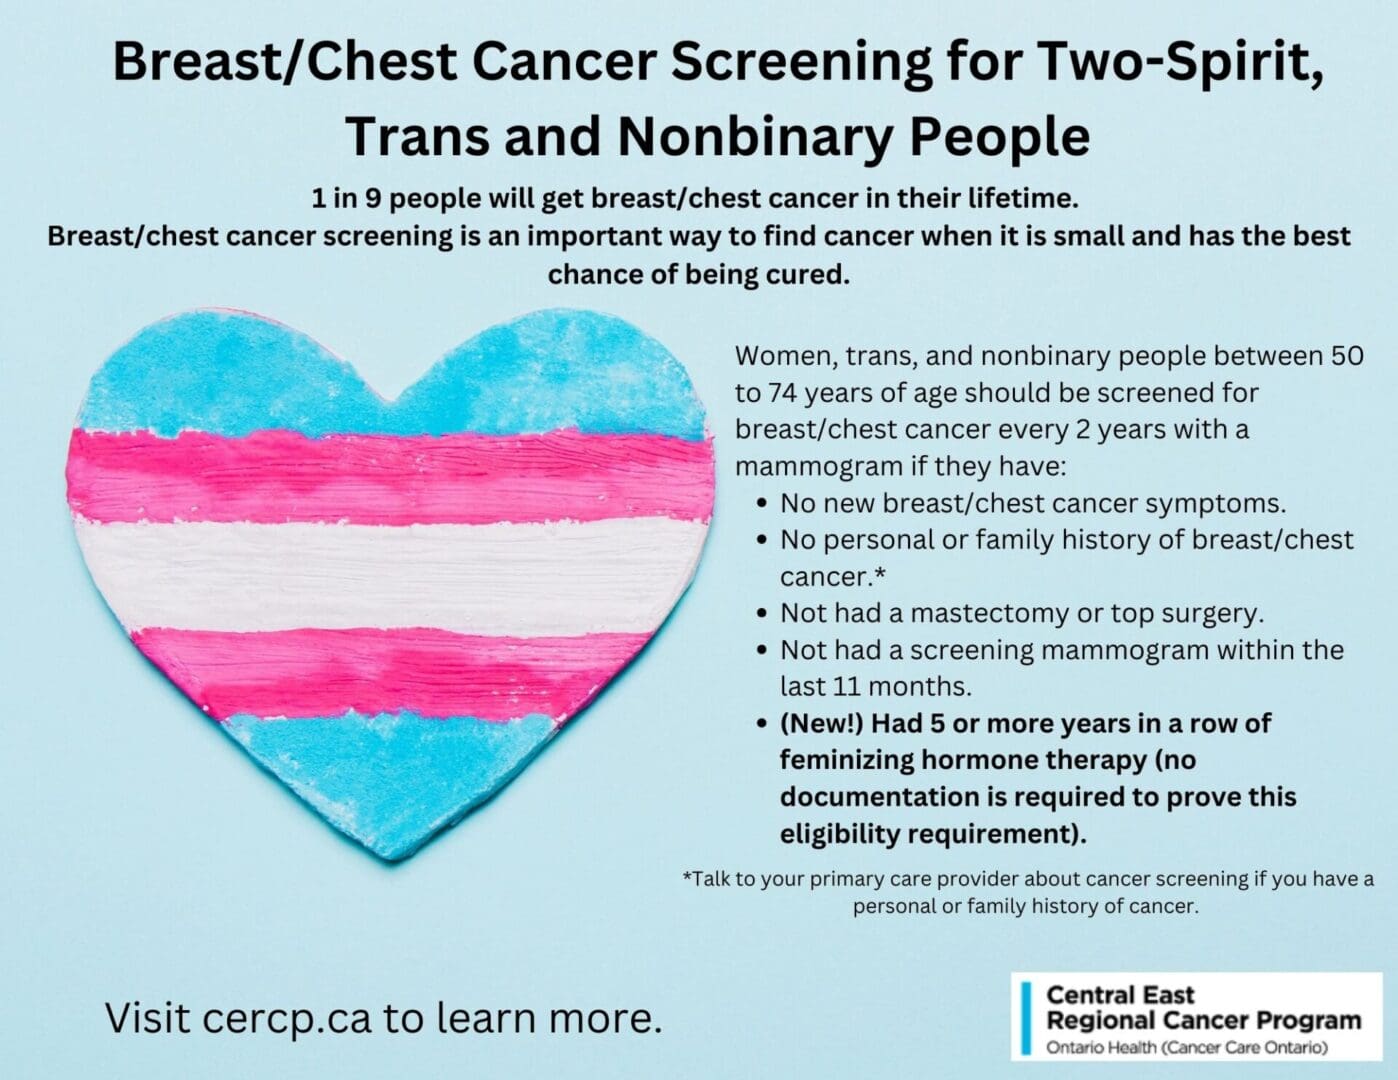 Improving BreastChest Cancer Screening for Two-Spirit, Trans and Nonbinary People